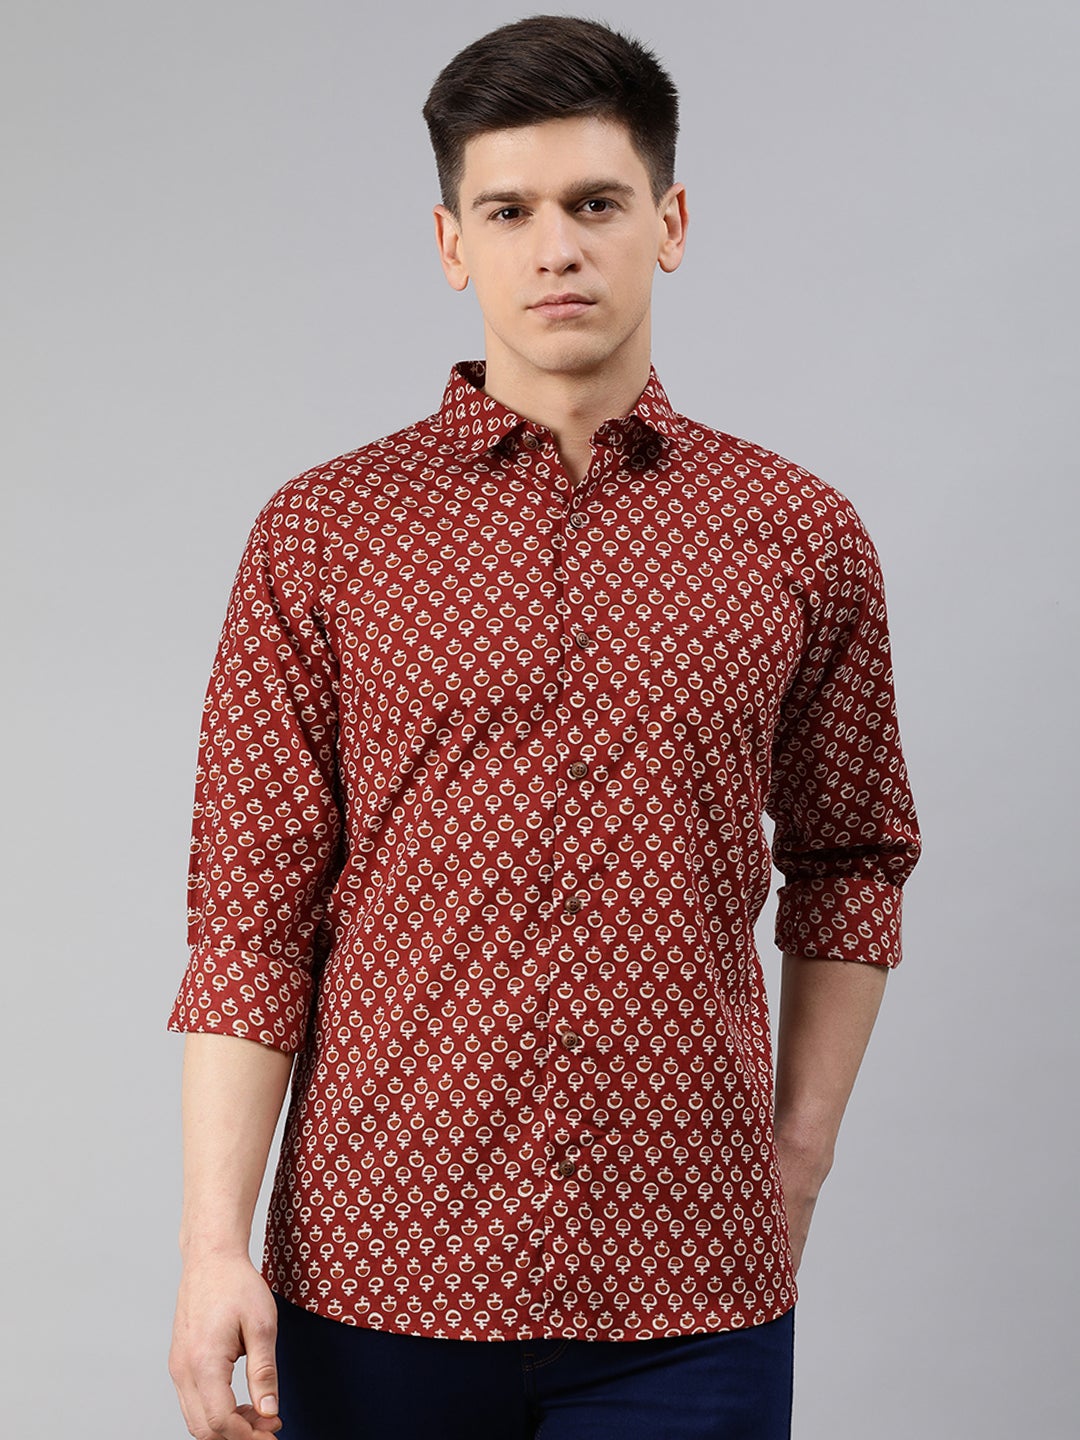 Maroon Cotton Full Sleeves Shirts For Men-MMF0223 - NOZ2TOZ